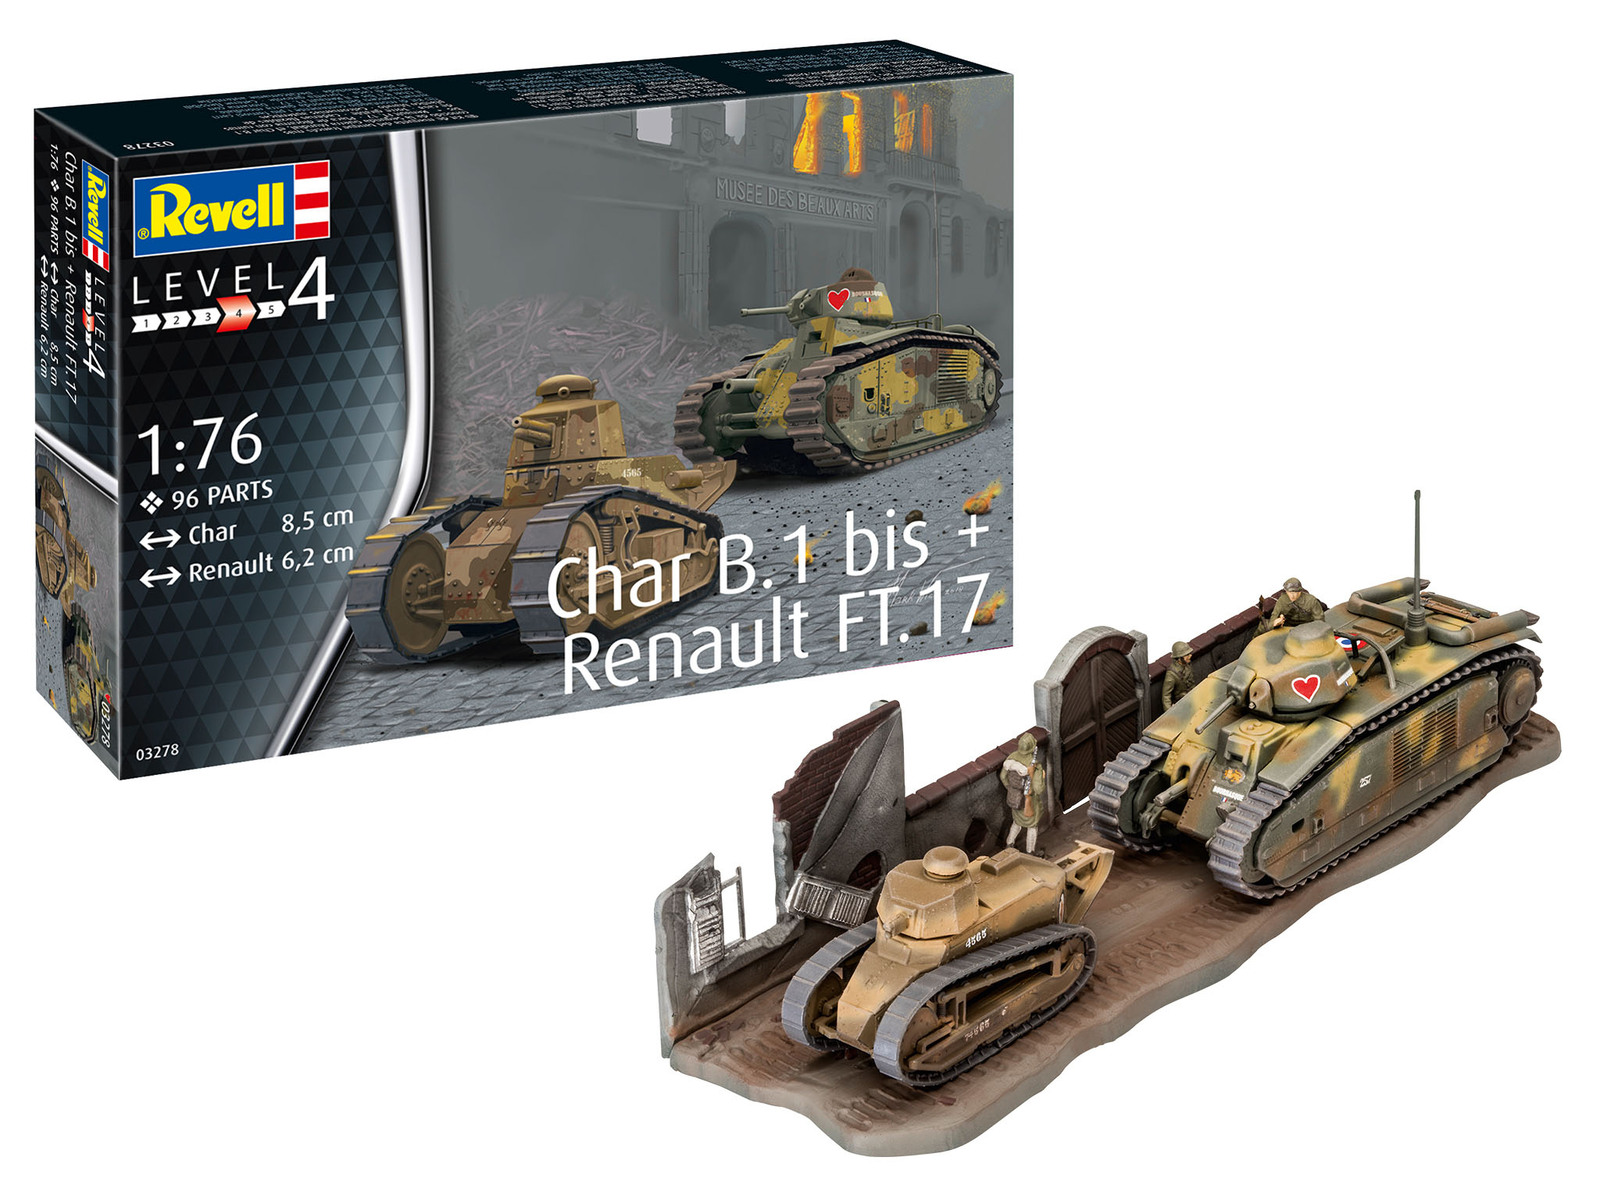 WWI Female Tank 1:76 Scale Free Shipping!